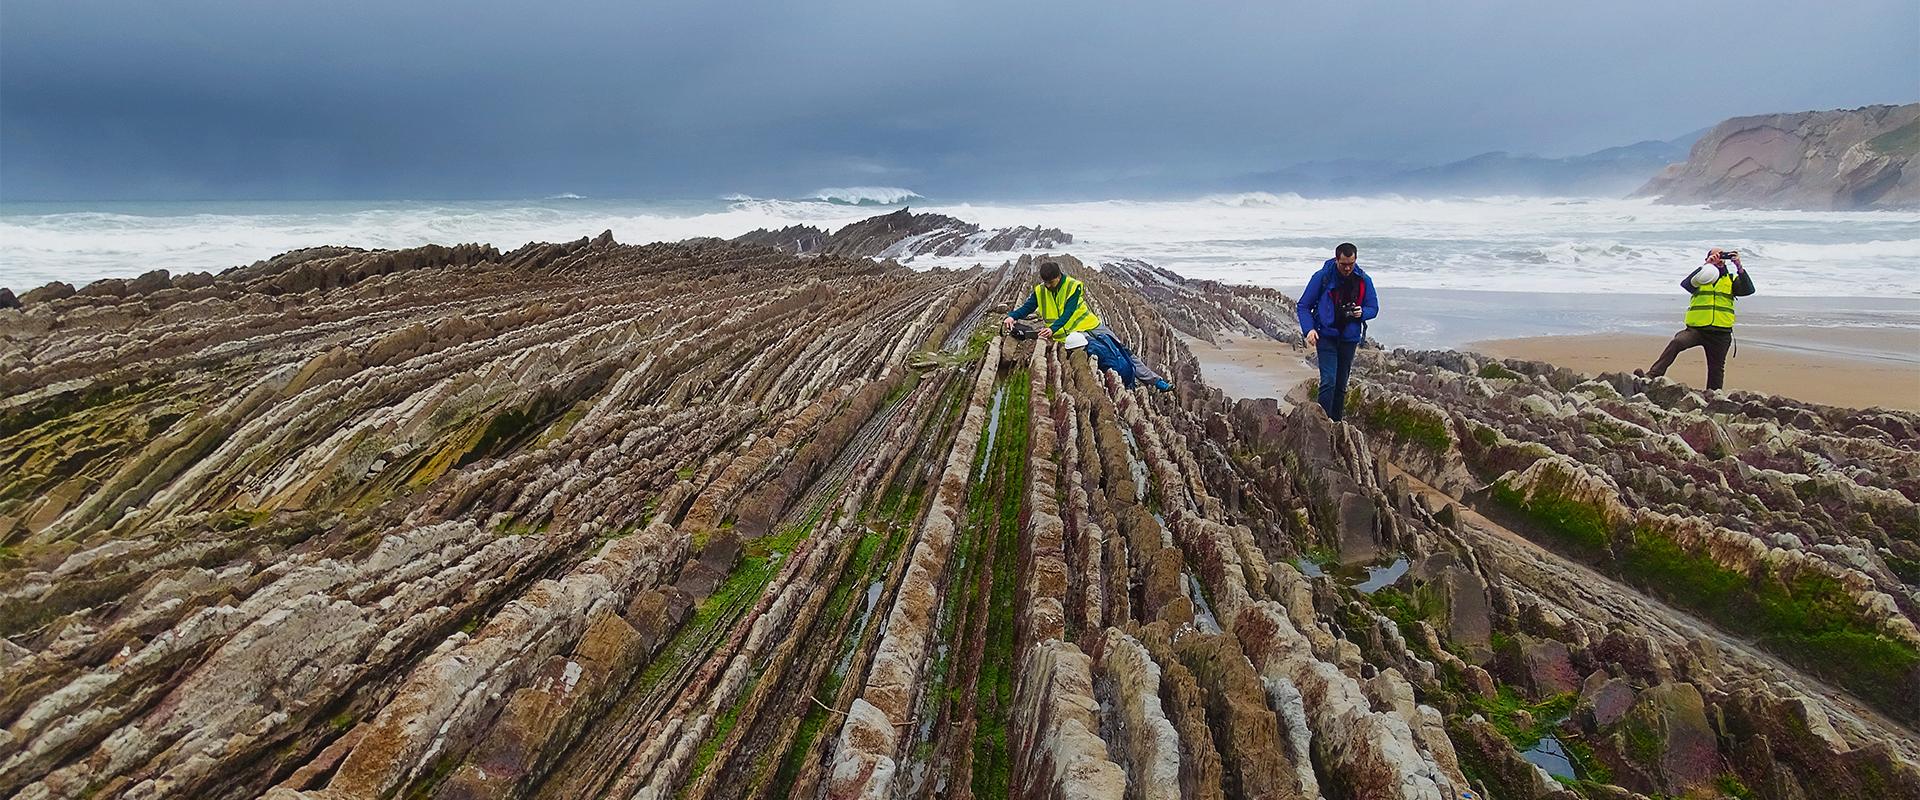 BRGM agents are studying the Flyschs of Zumaia, Spanish Basque region